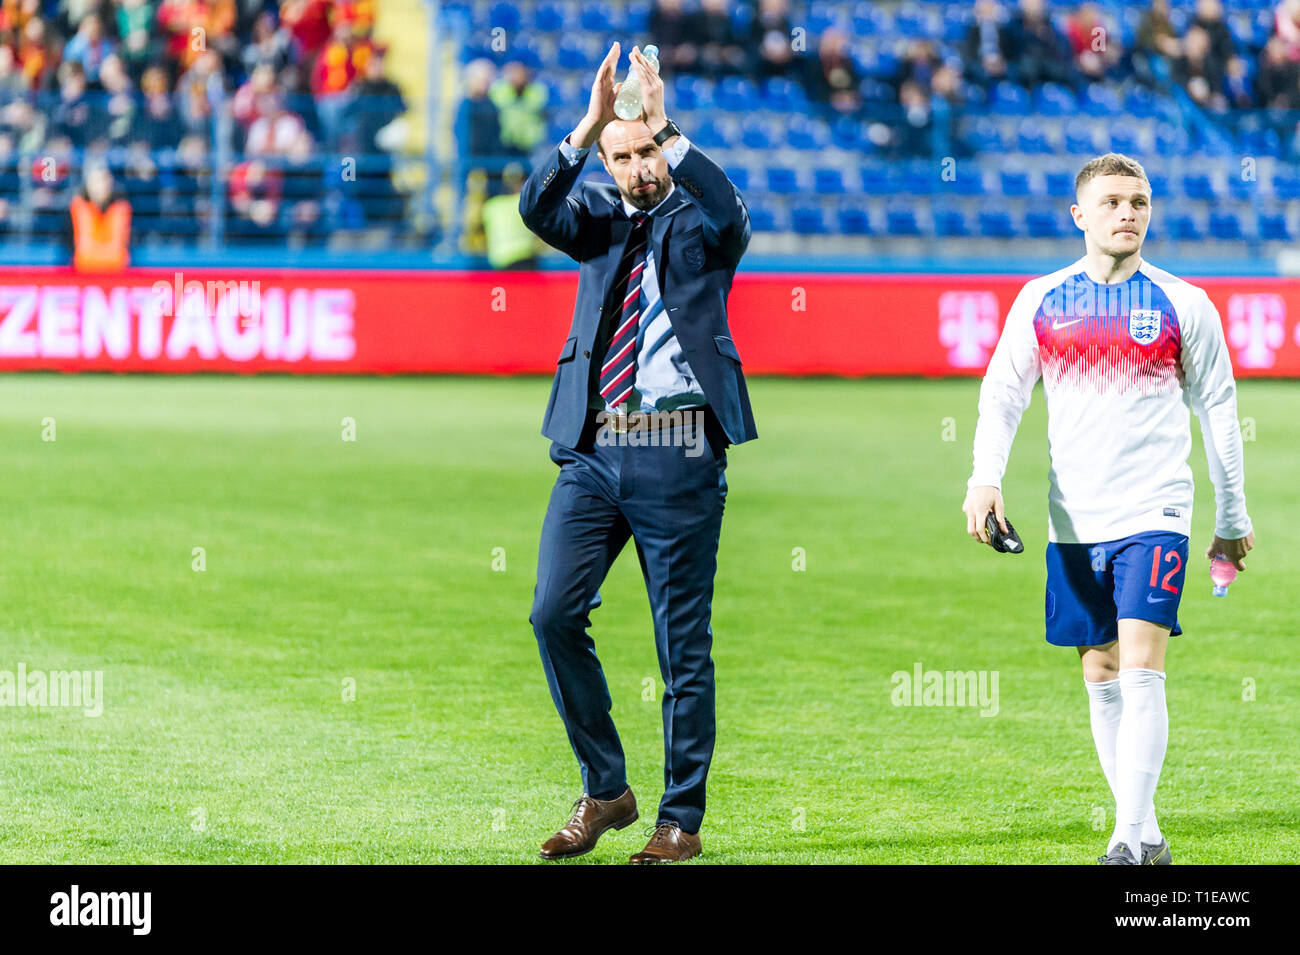 Podgorica, Montenegro. 26th Mar, 2019. Euro2020 Qualifications Group A Gareth Southgate before match with Montenegro Credit: Stefan Ivanovic/Alamy Live News Stock Photo